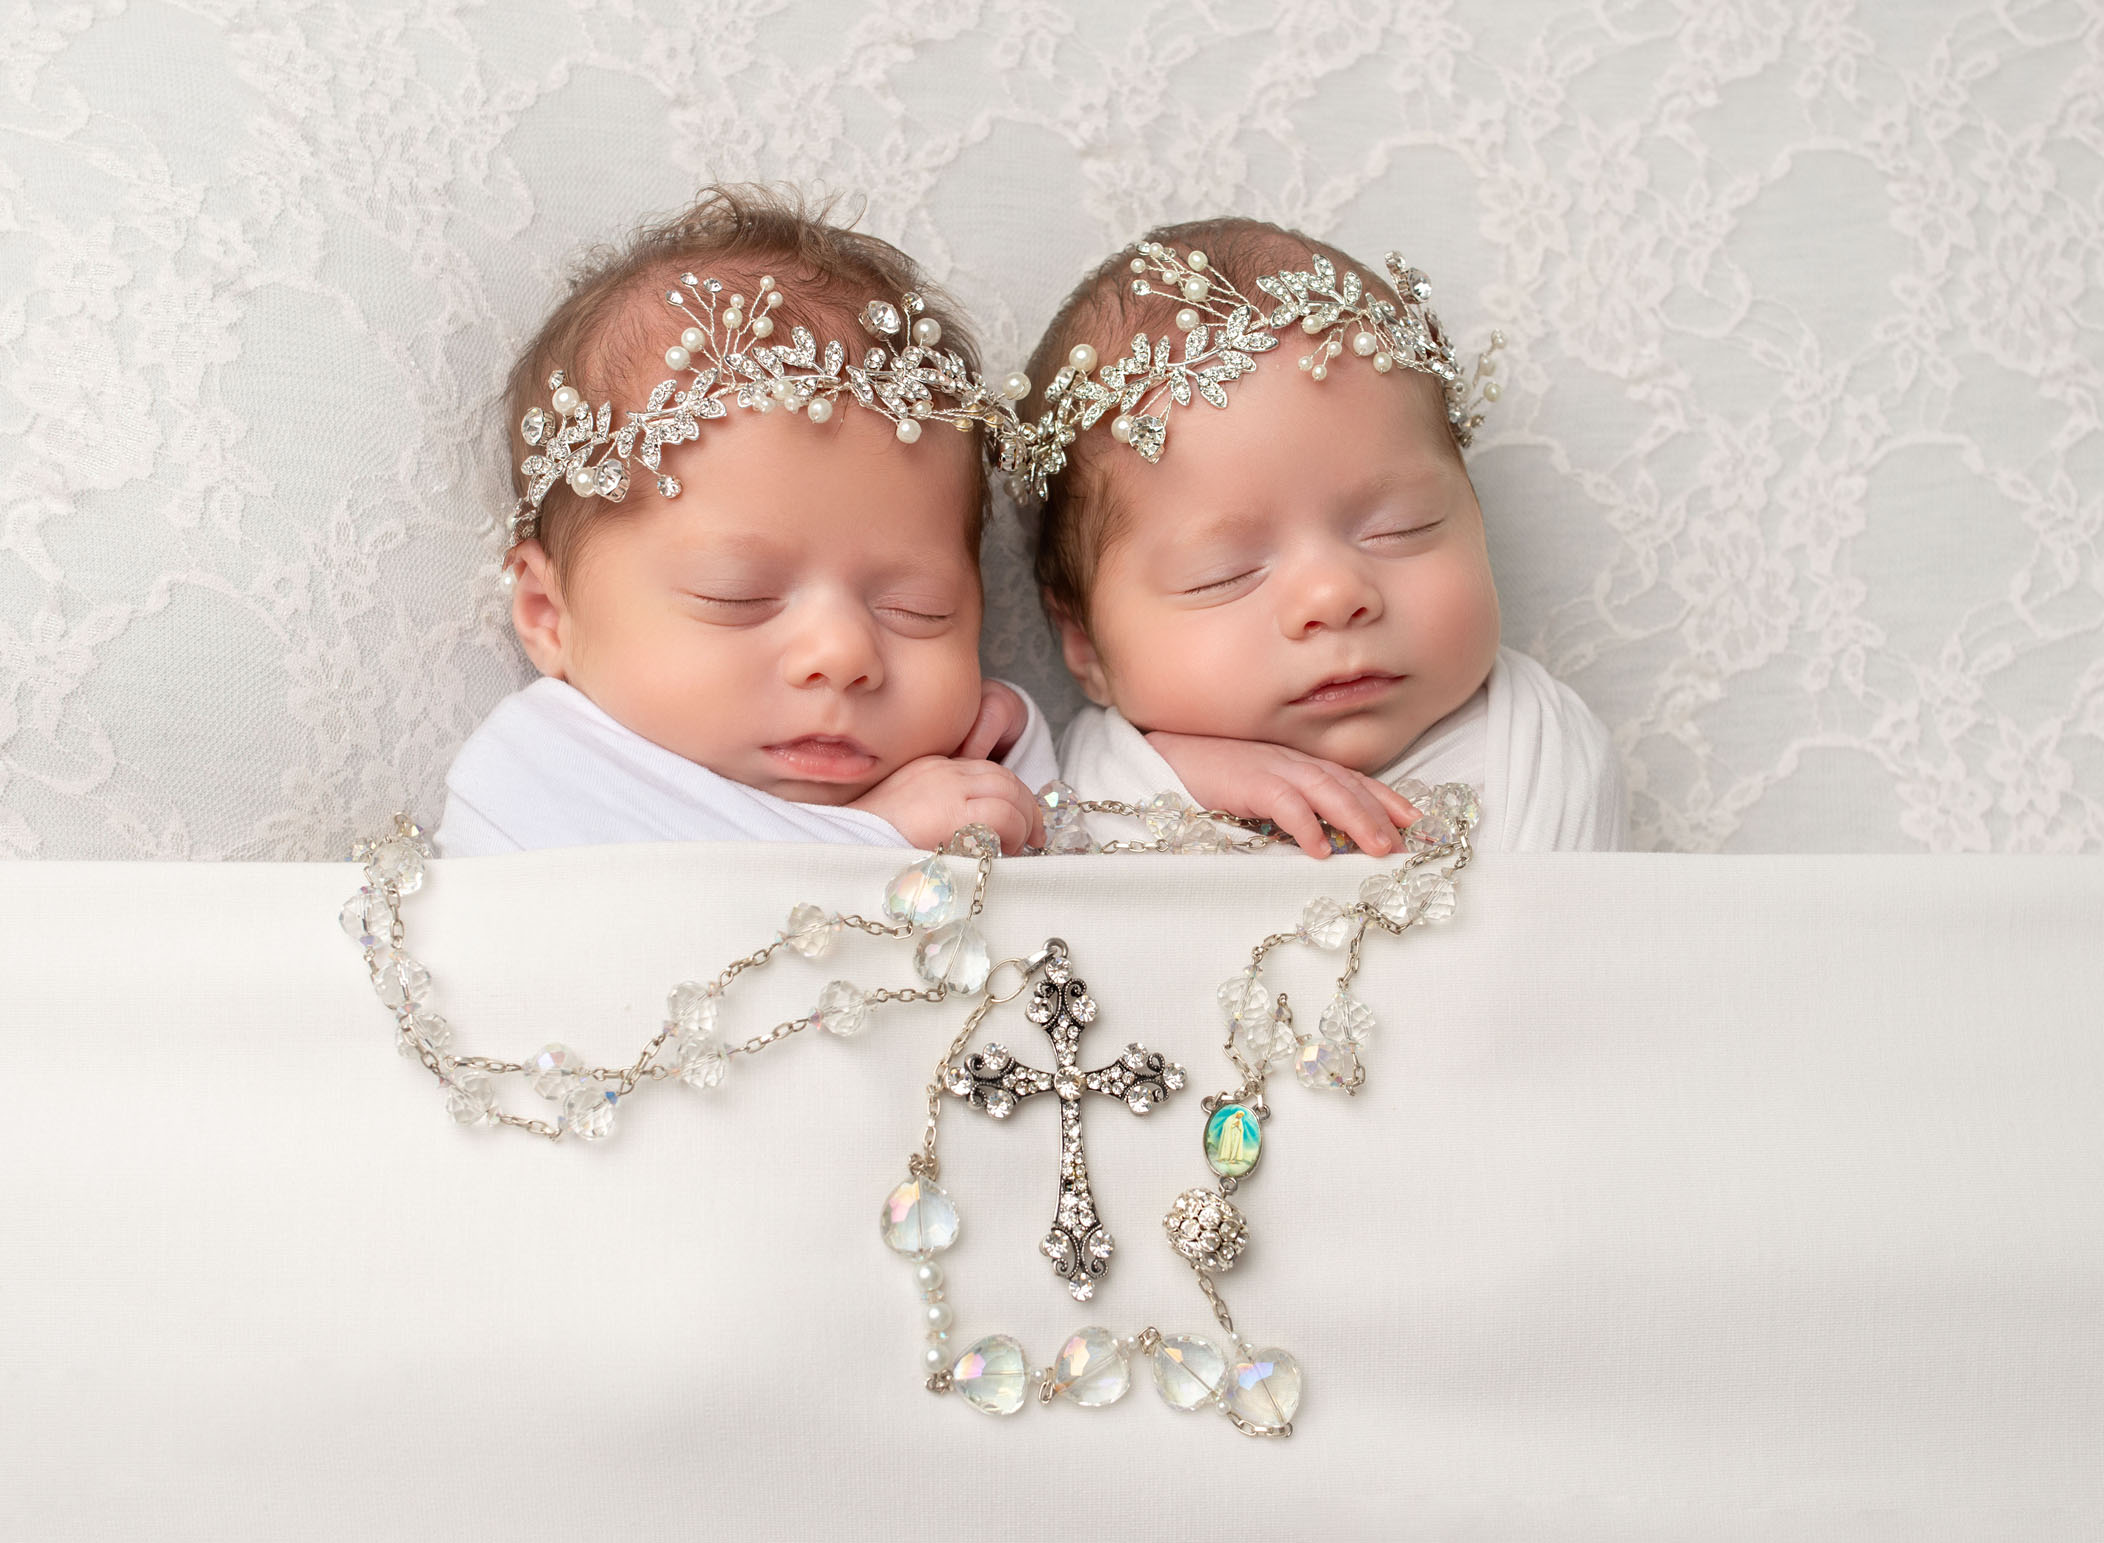 identical twin girls sleeping in bed while holding a large rosary